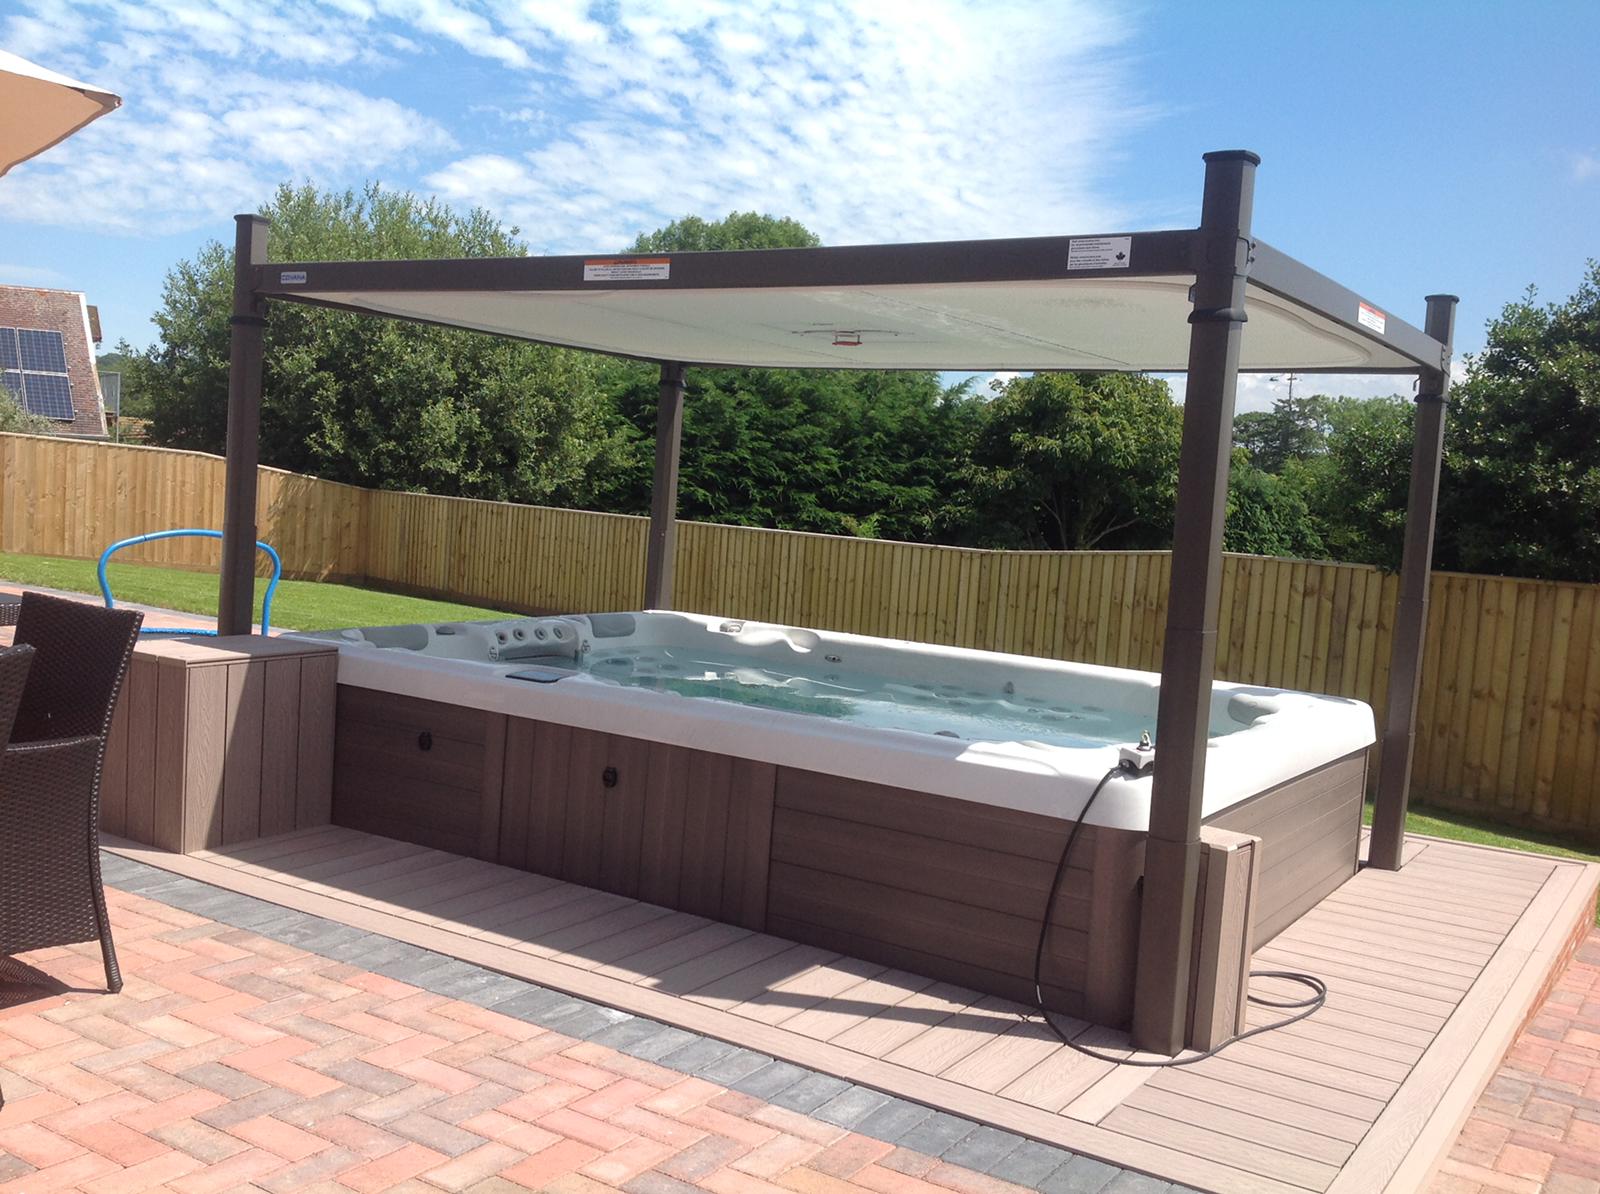 American Whirlpool 982 Hot Tub with Covana Evolution